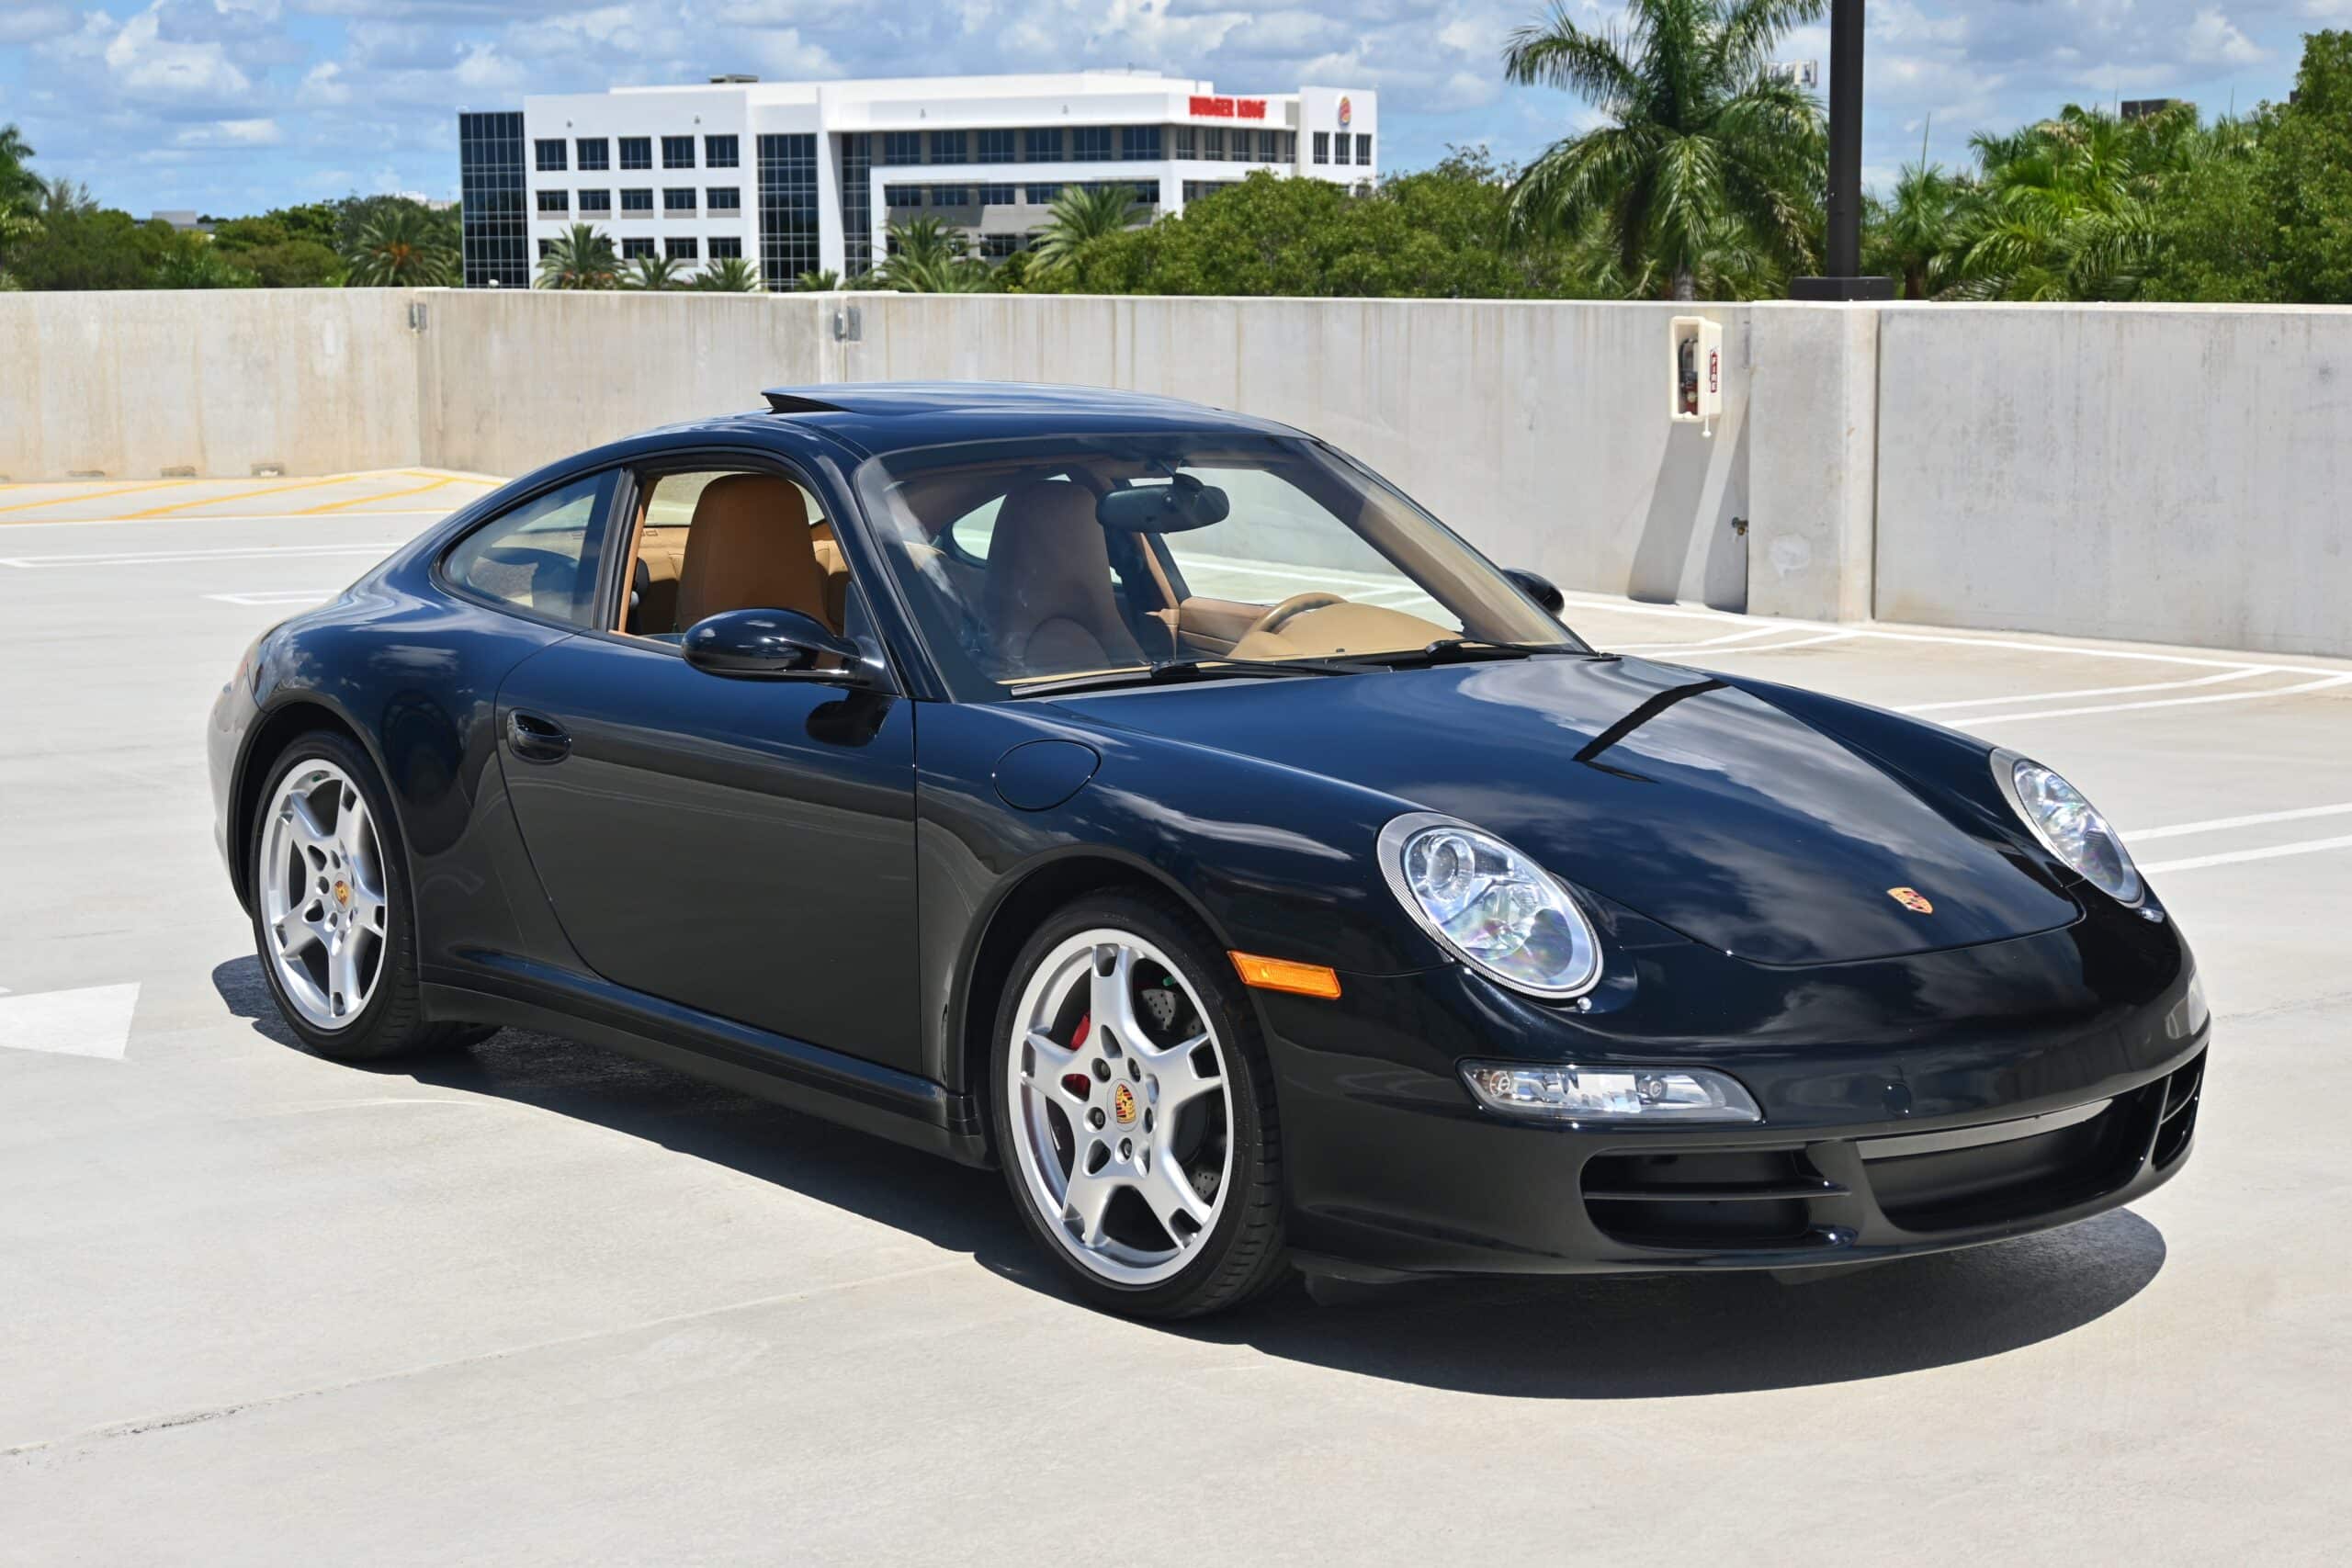 2006 Porsche 911 Carrera 4S 997 3.8L – 6 Speed Manual – Factory Widebody Turbo Look – Only 43K Miles – Like NEW